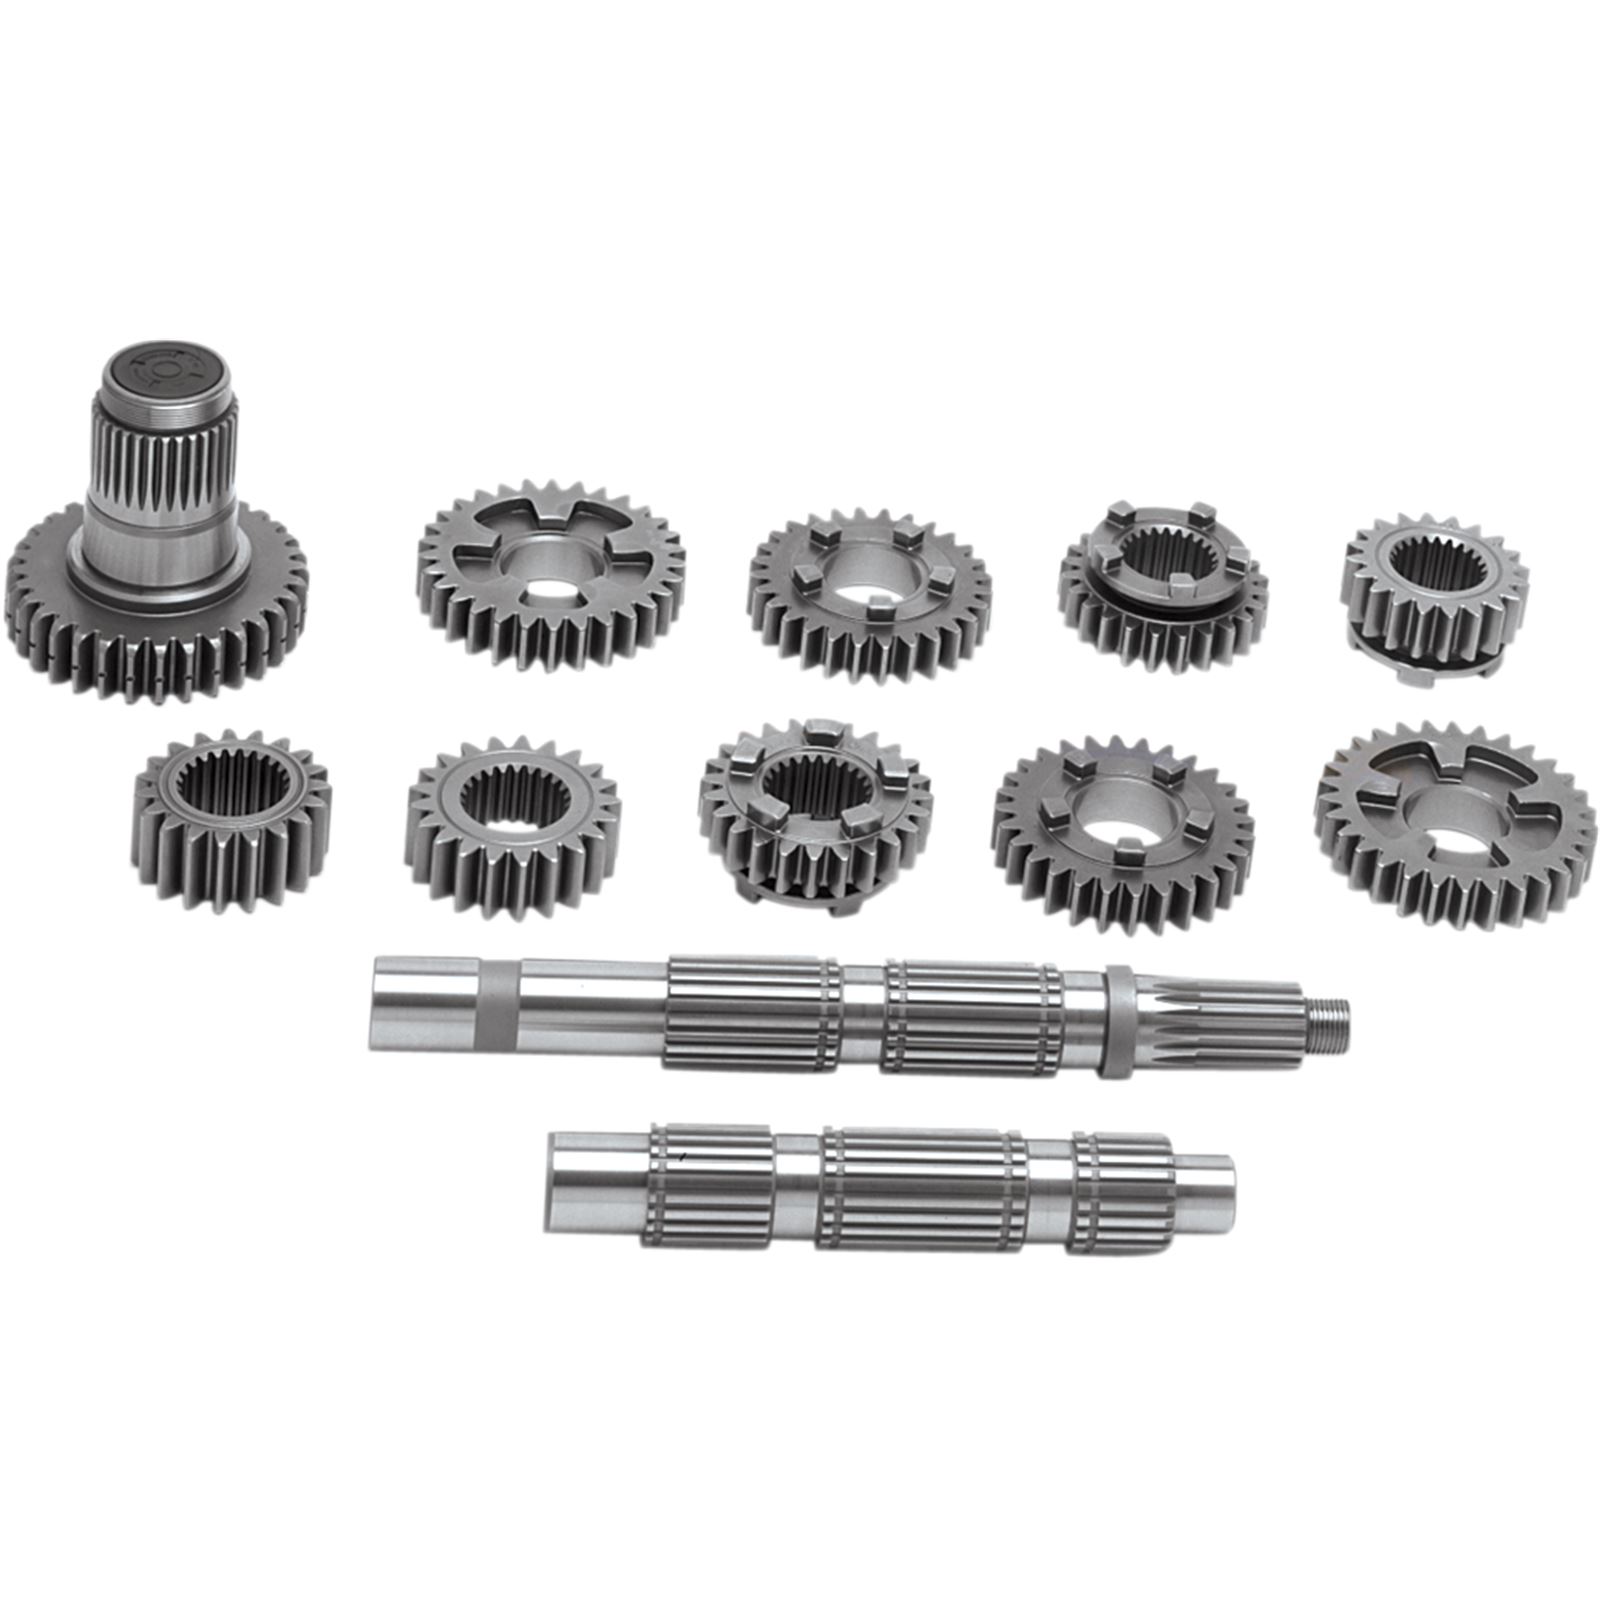 Andrews Products 5-Speed Gear Set - 3.24:1 First Ratio